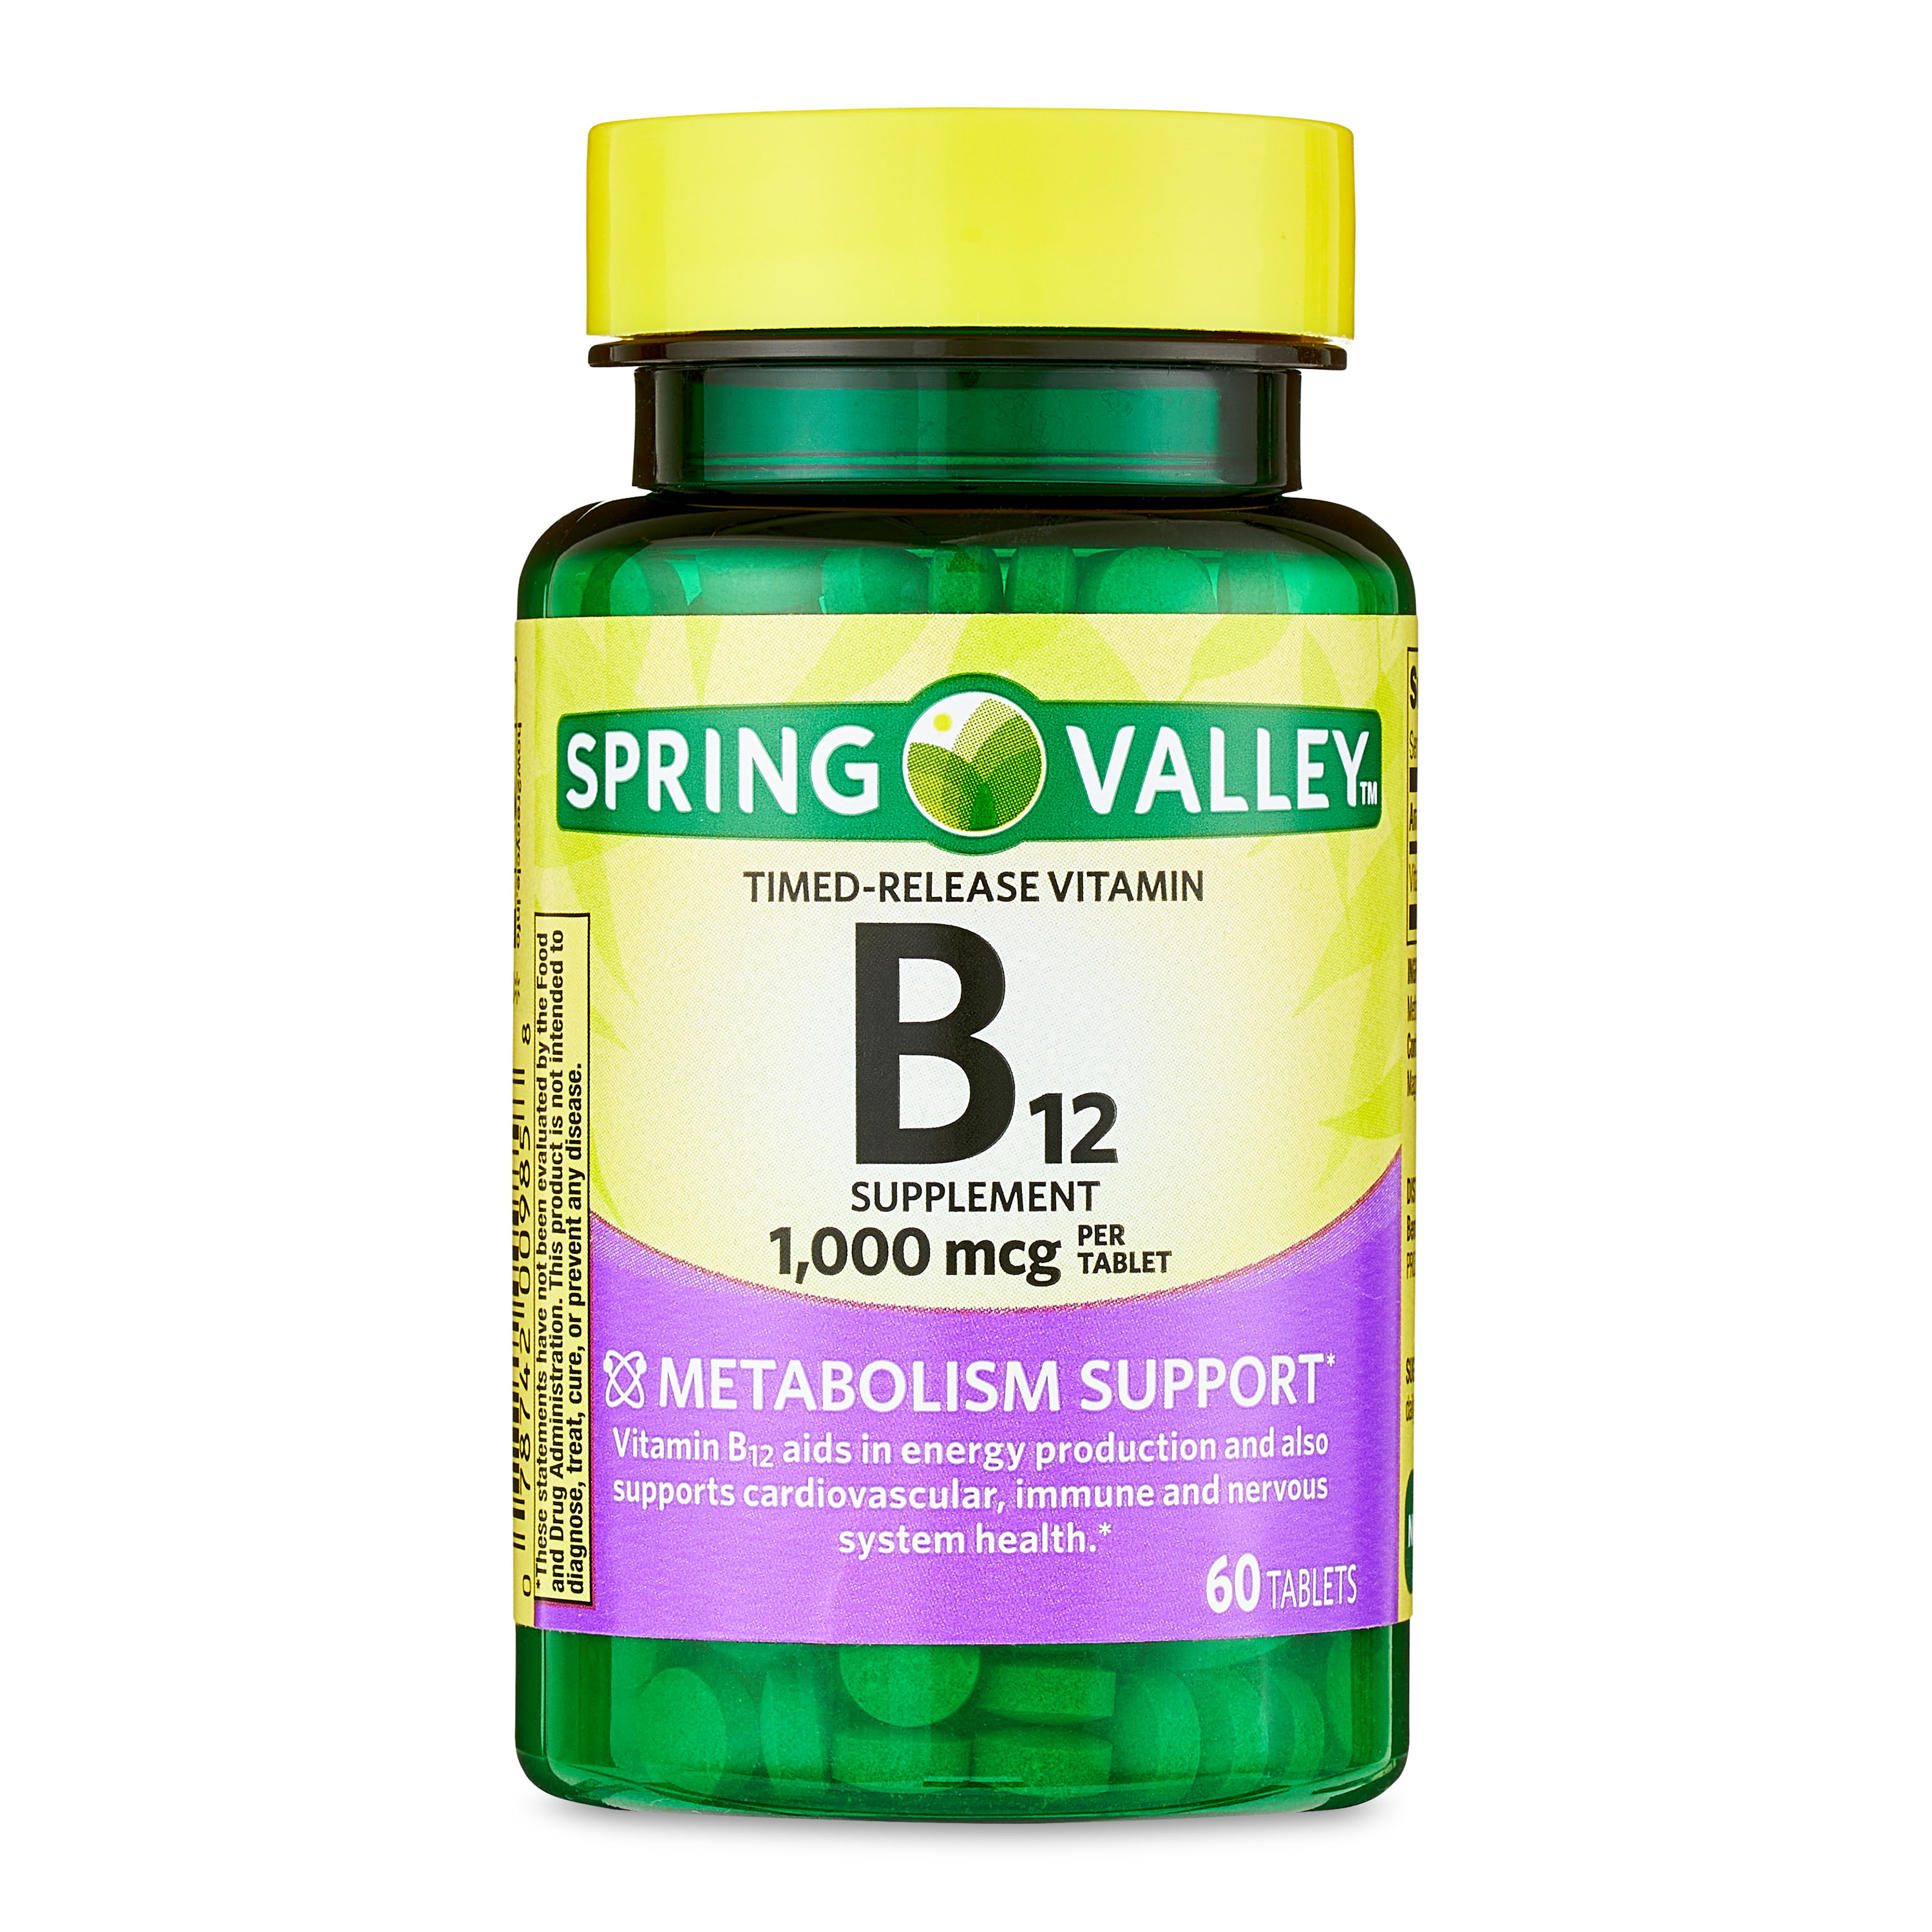 Spring Valley Timed-Release Vitamin B12 Tablets, 1,000 mcg, 60 Count - image 1 of 10